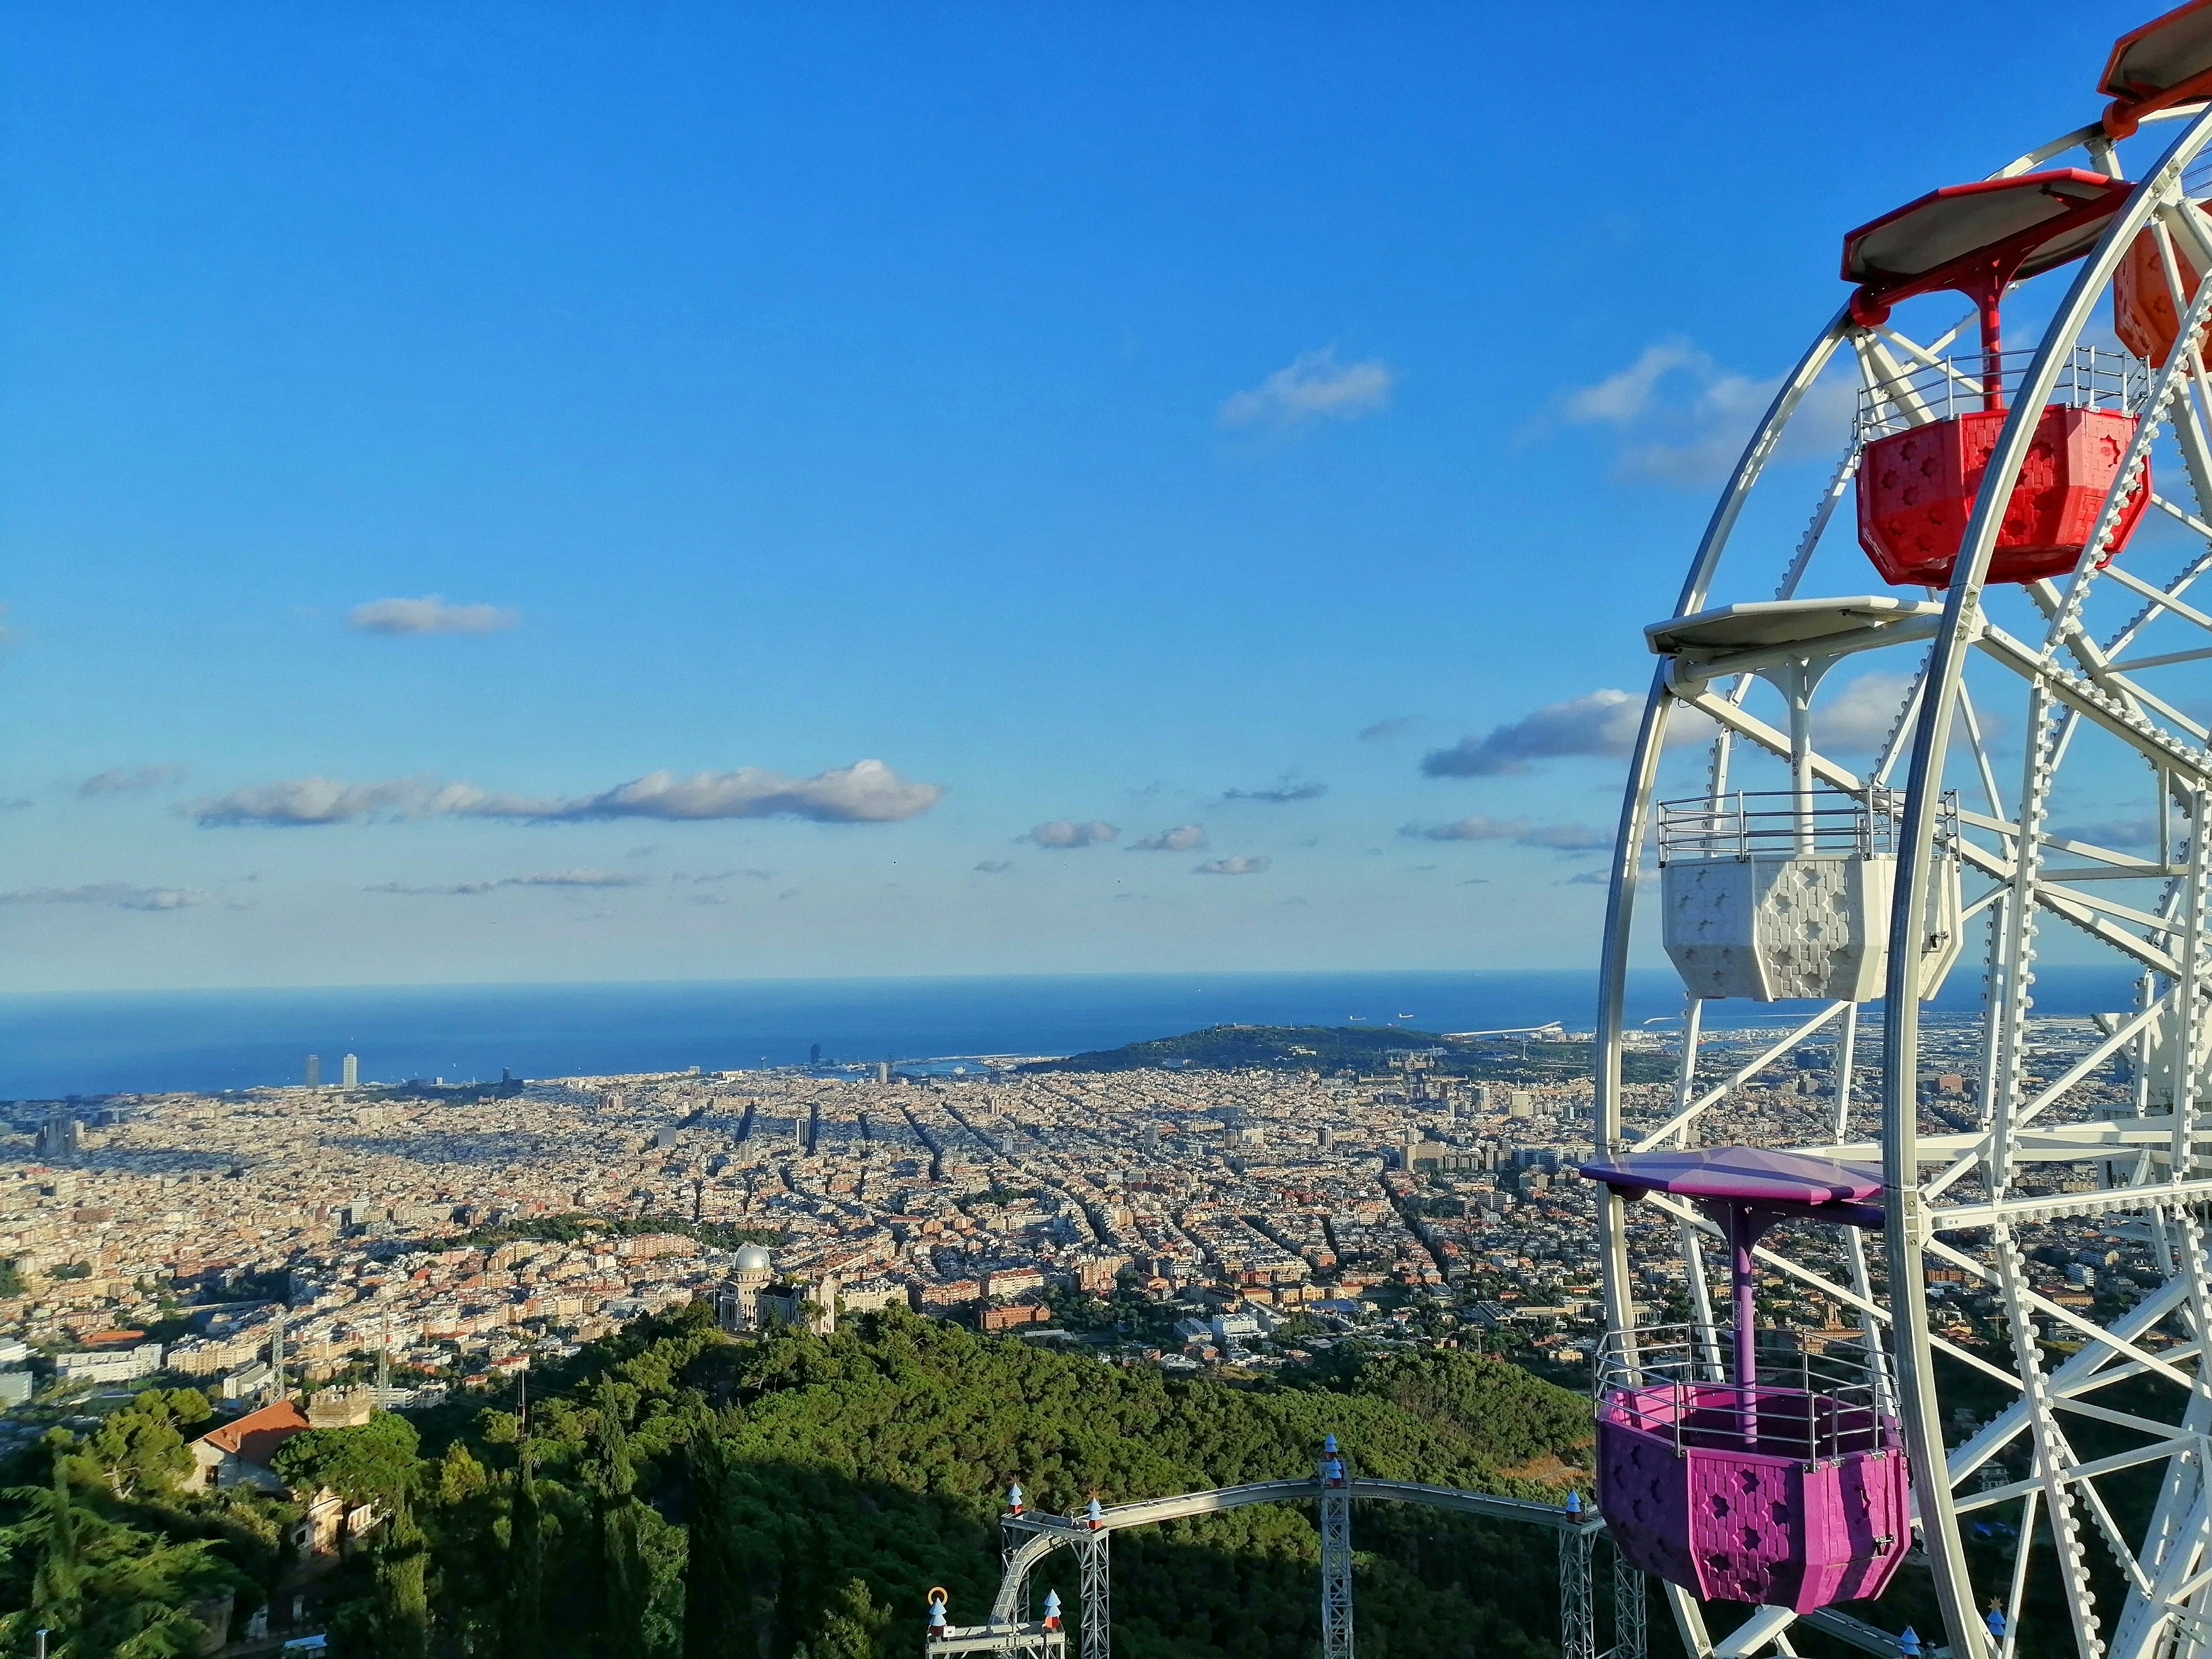 Barcelona from the top of Tibidabo mountain.